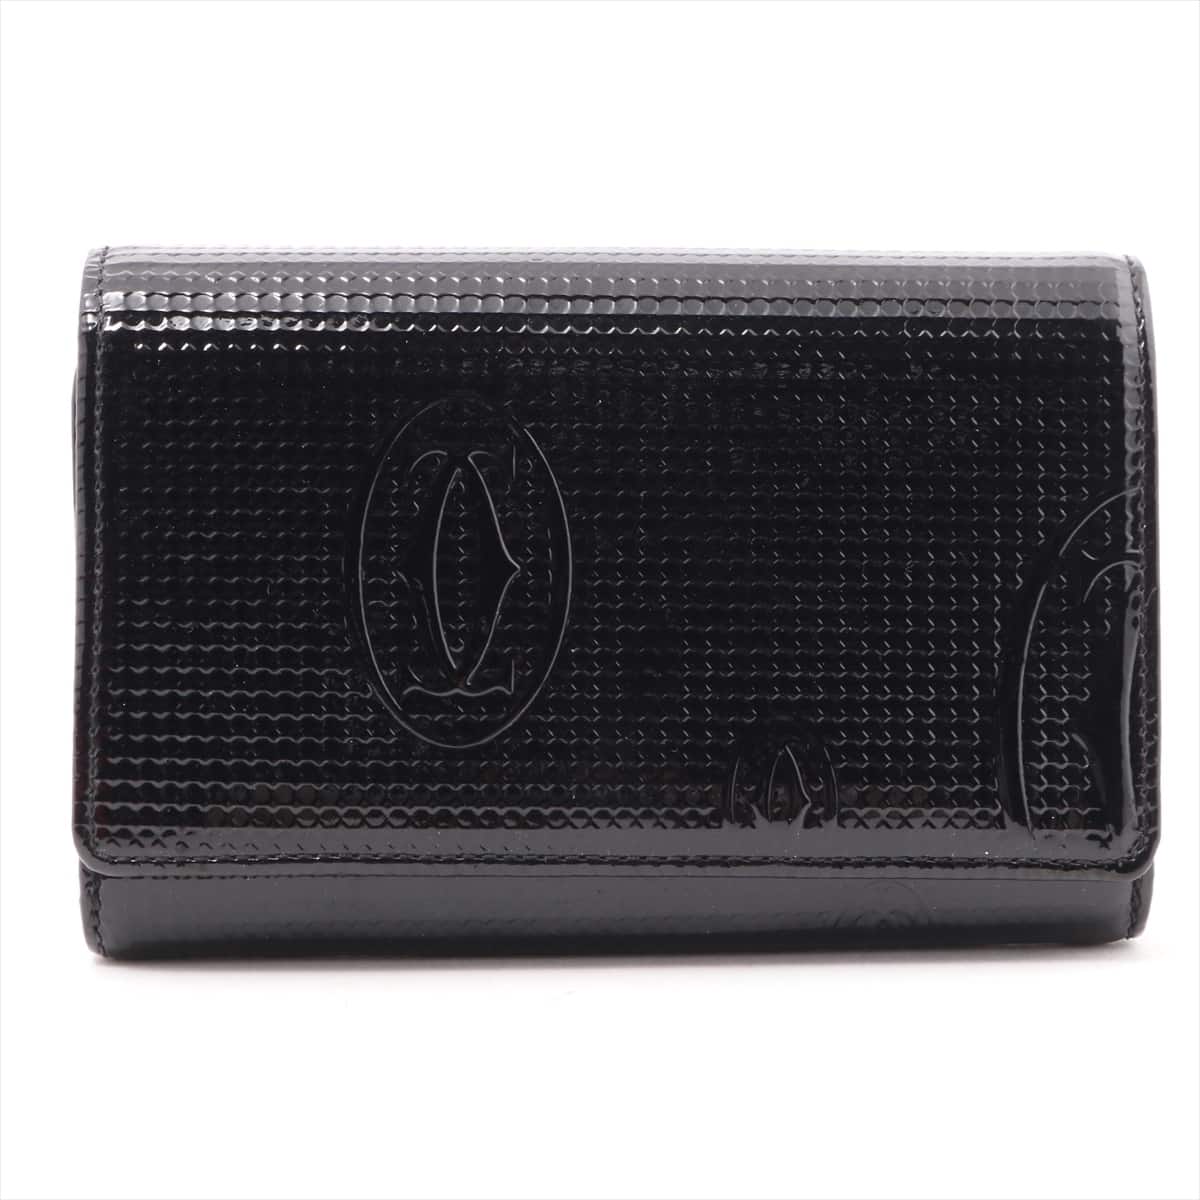 Cartier Happy Birthday Patent leather Wallet Black